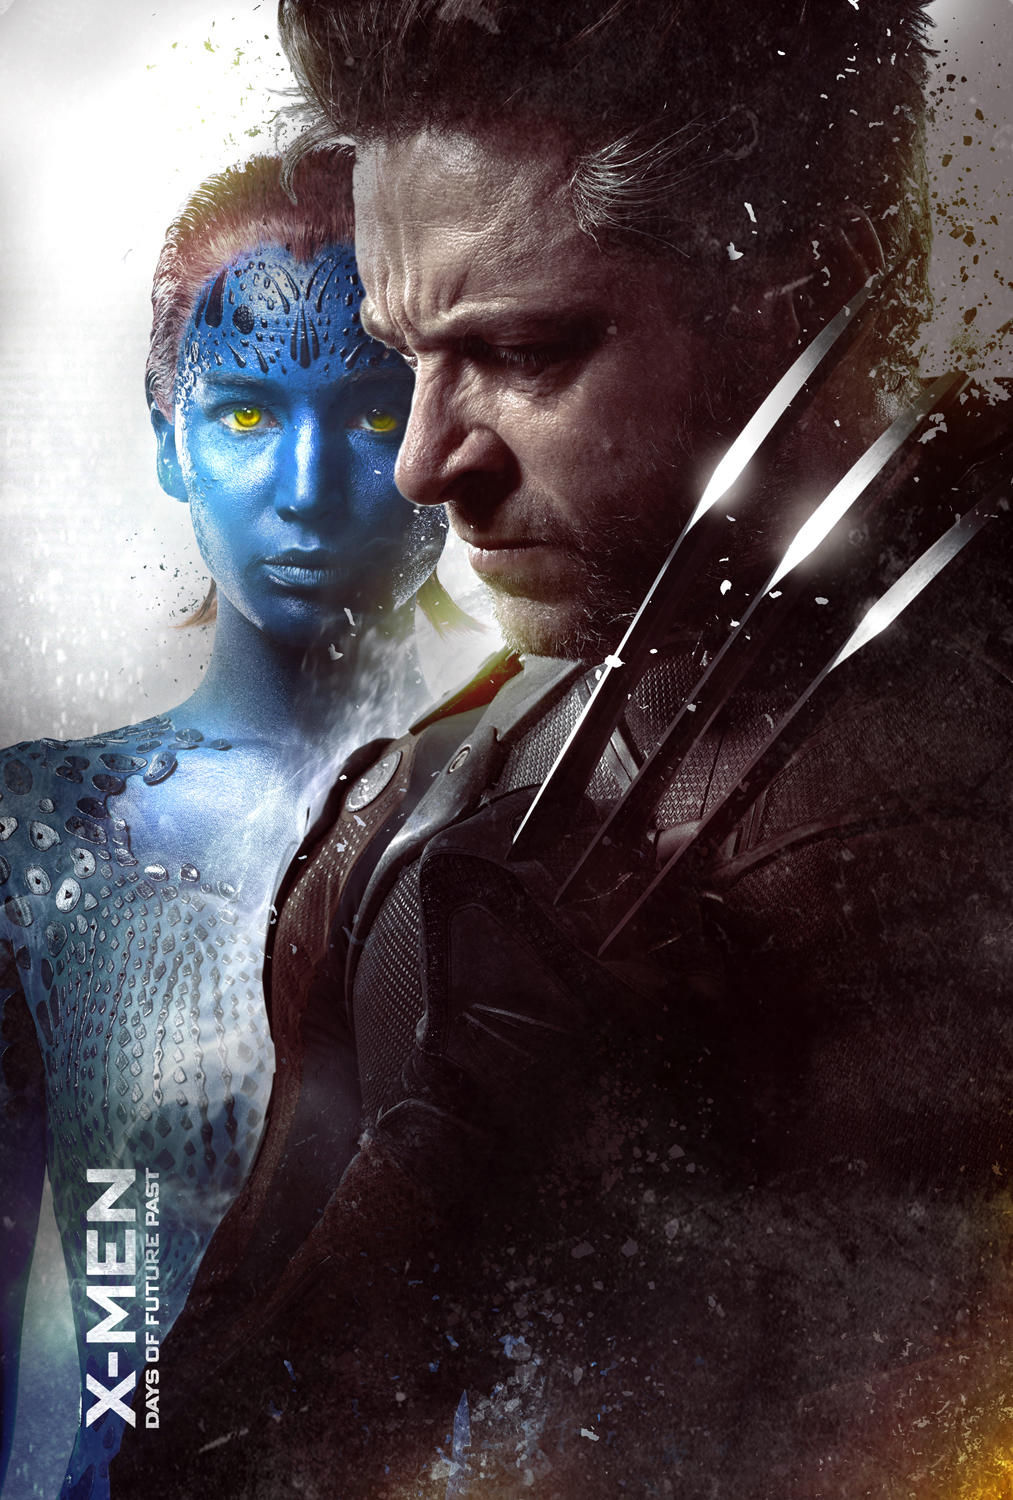 X Men Days Of Future Past Wallpapers